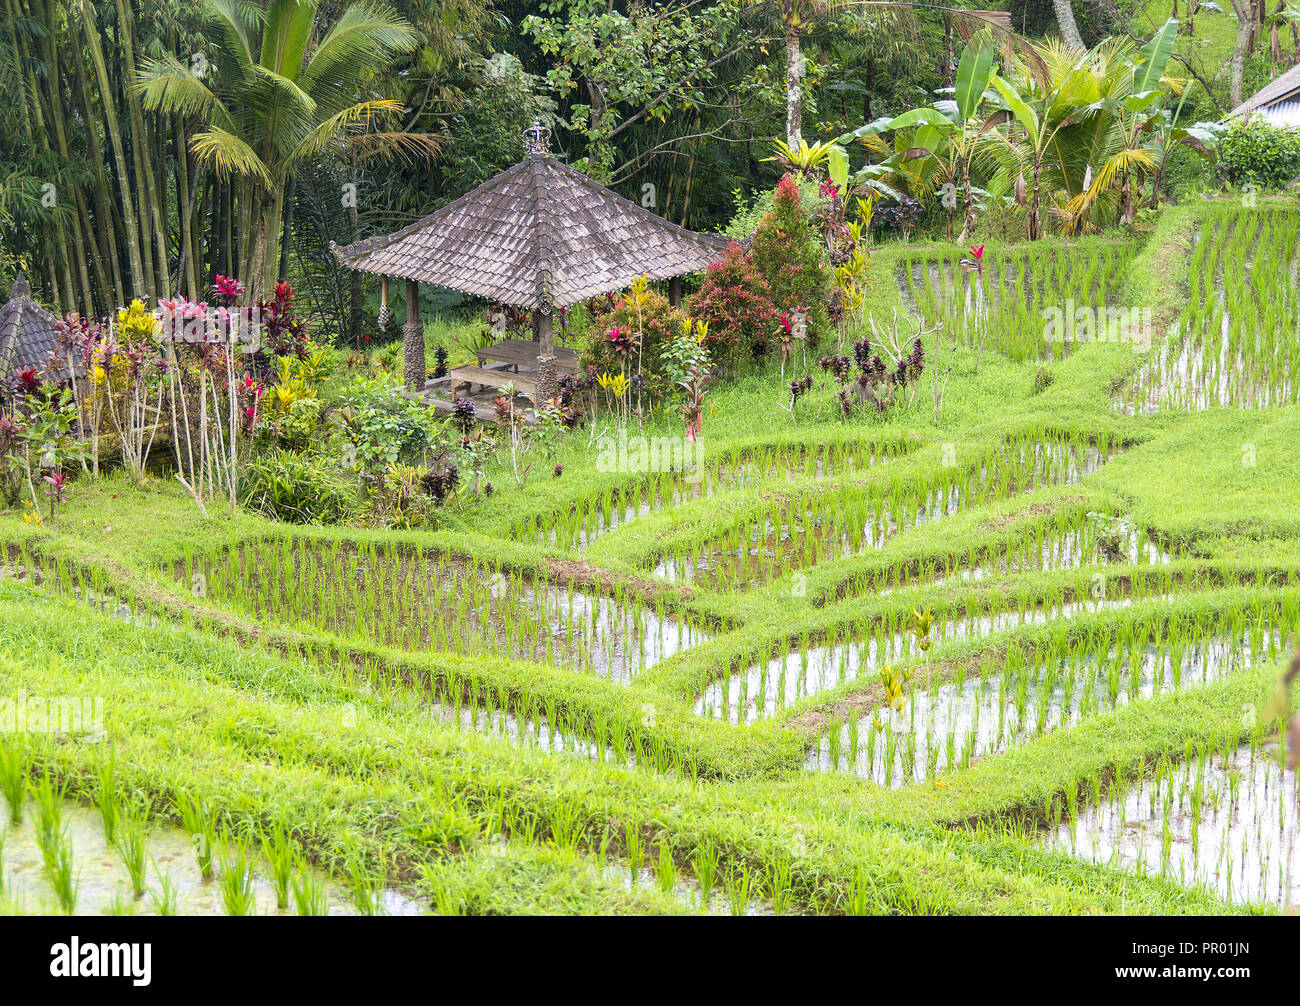 Hindu shrine or temple placed in a rice paddy field. Bali Indonesia. Stock Photo